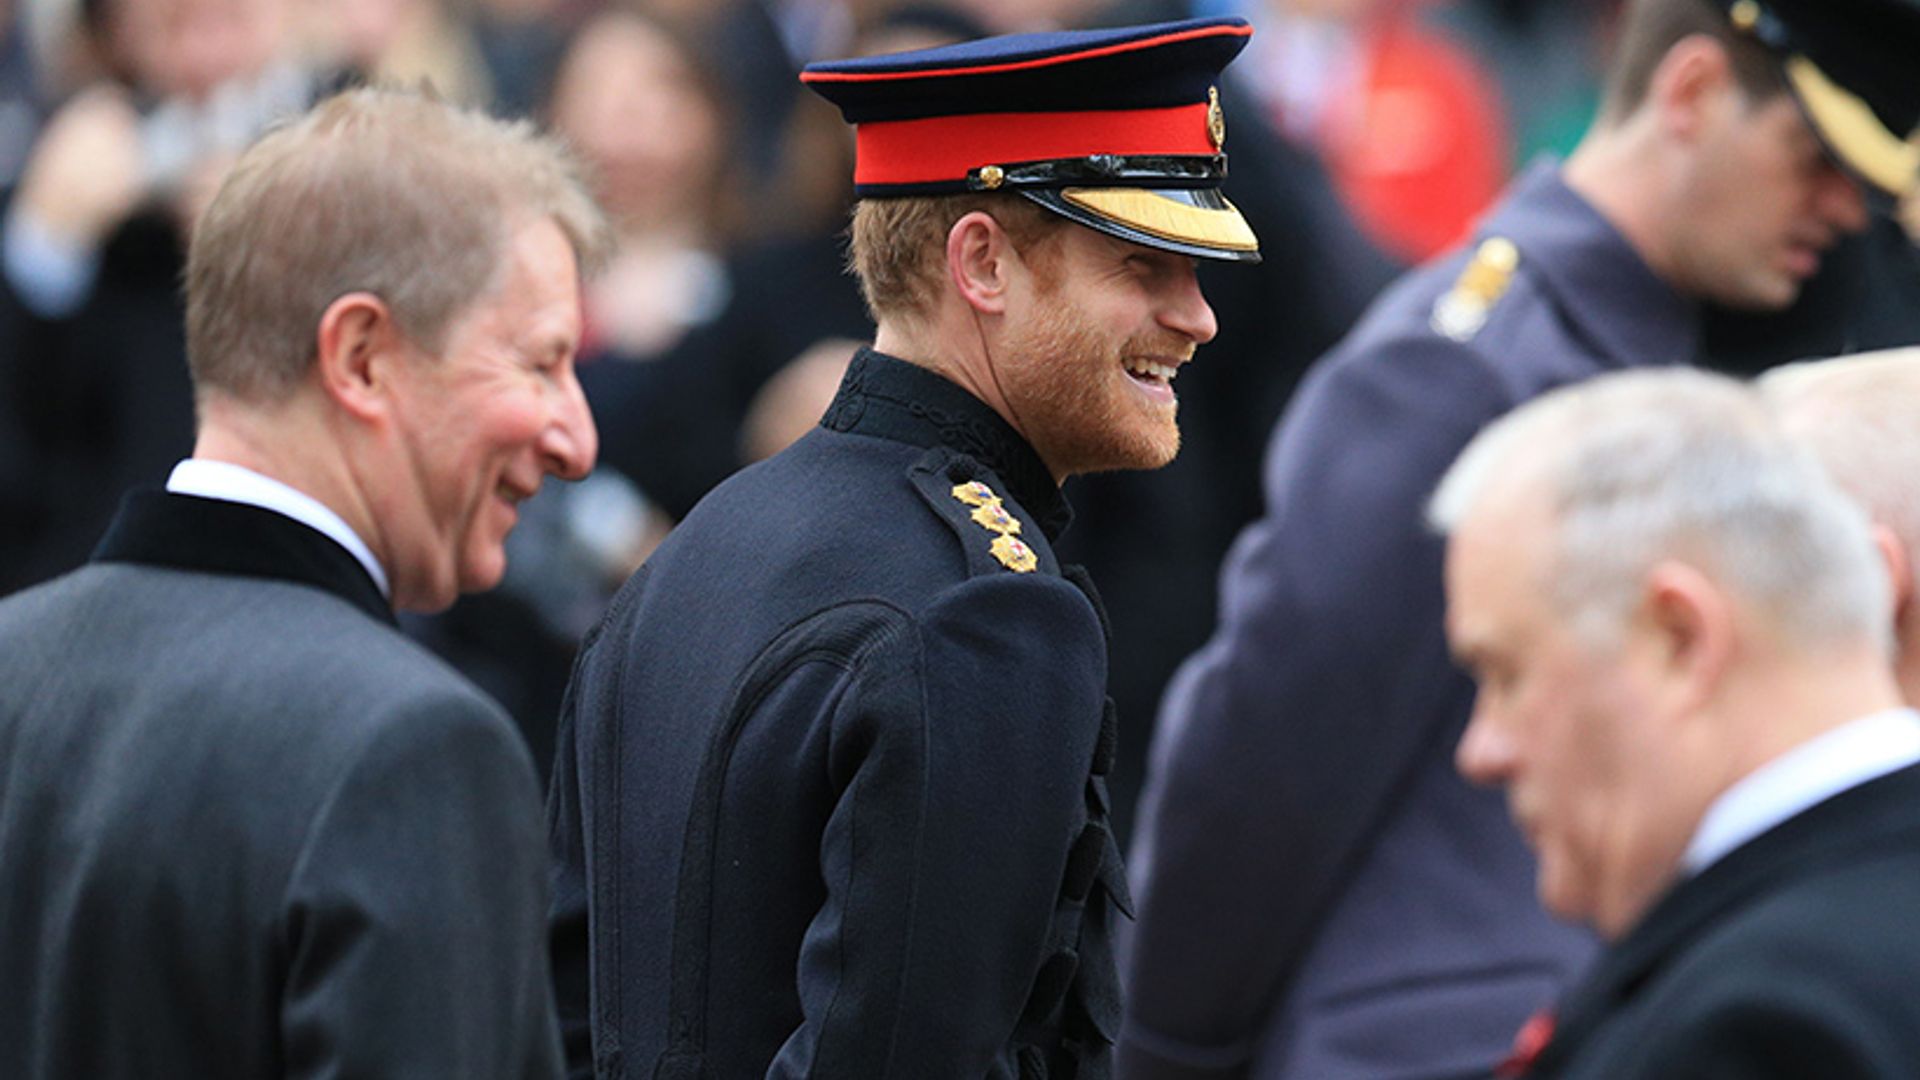 Prince Harry returns to the spotlight for Remembrance Day event